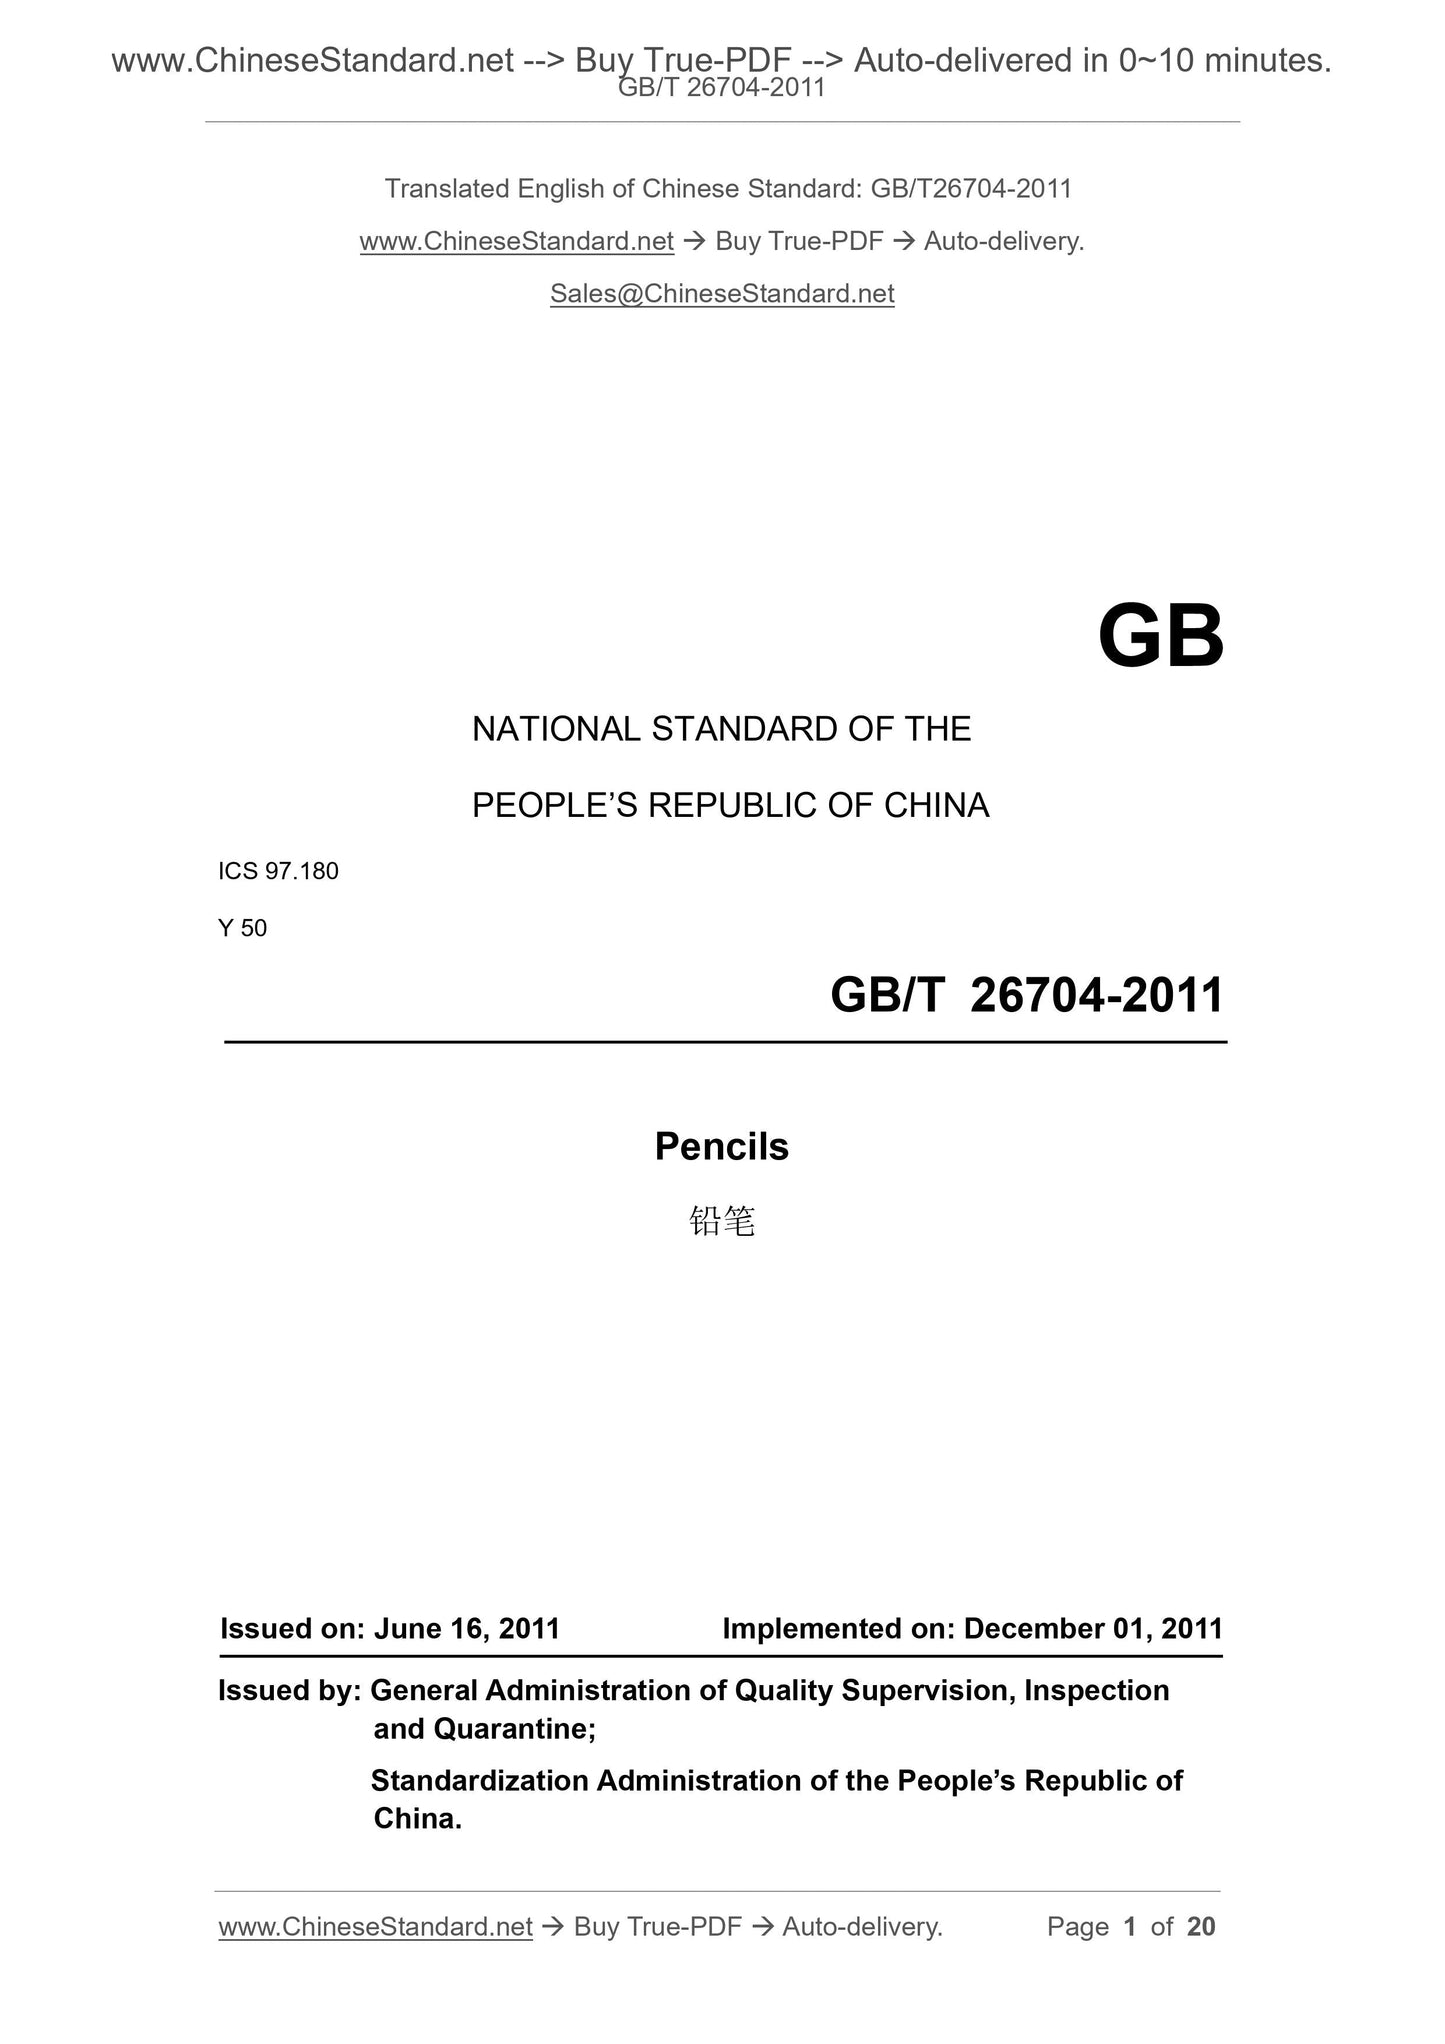 GB/T 26704-2011 Page 1